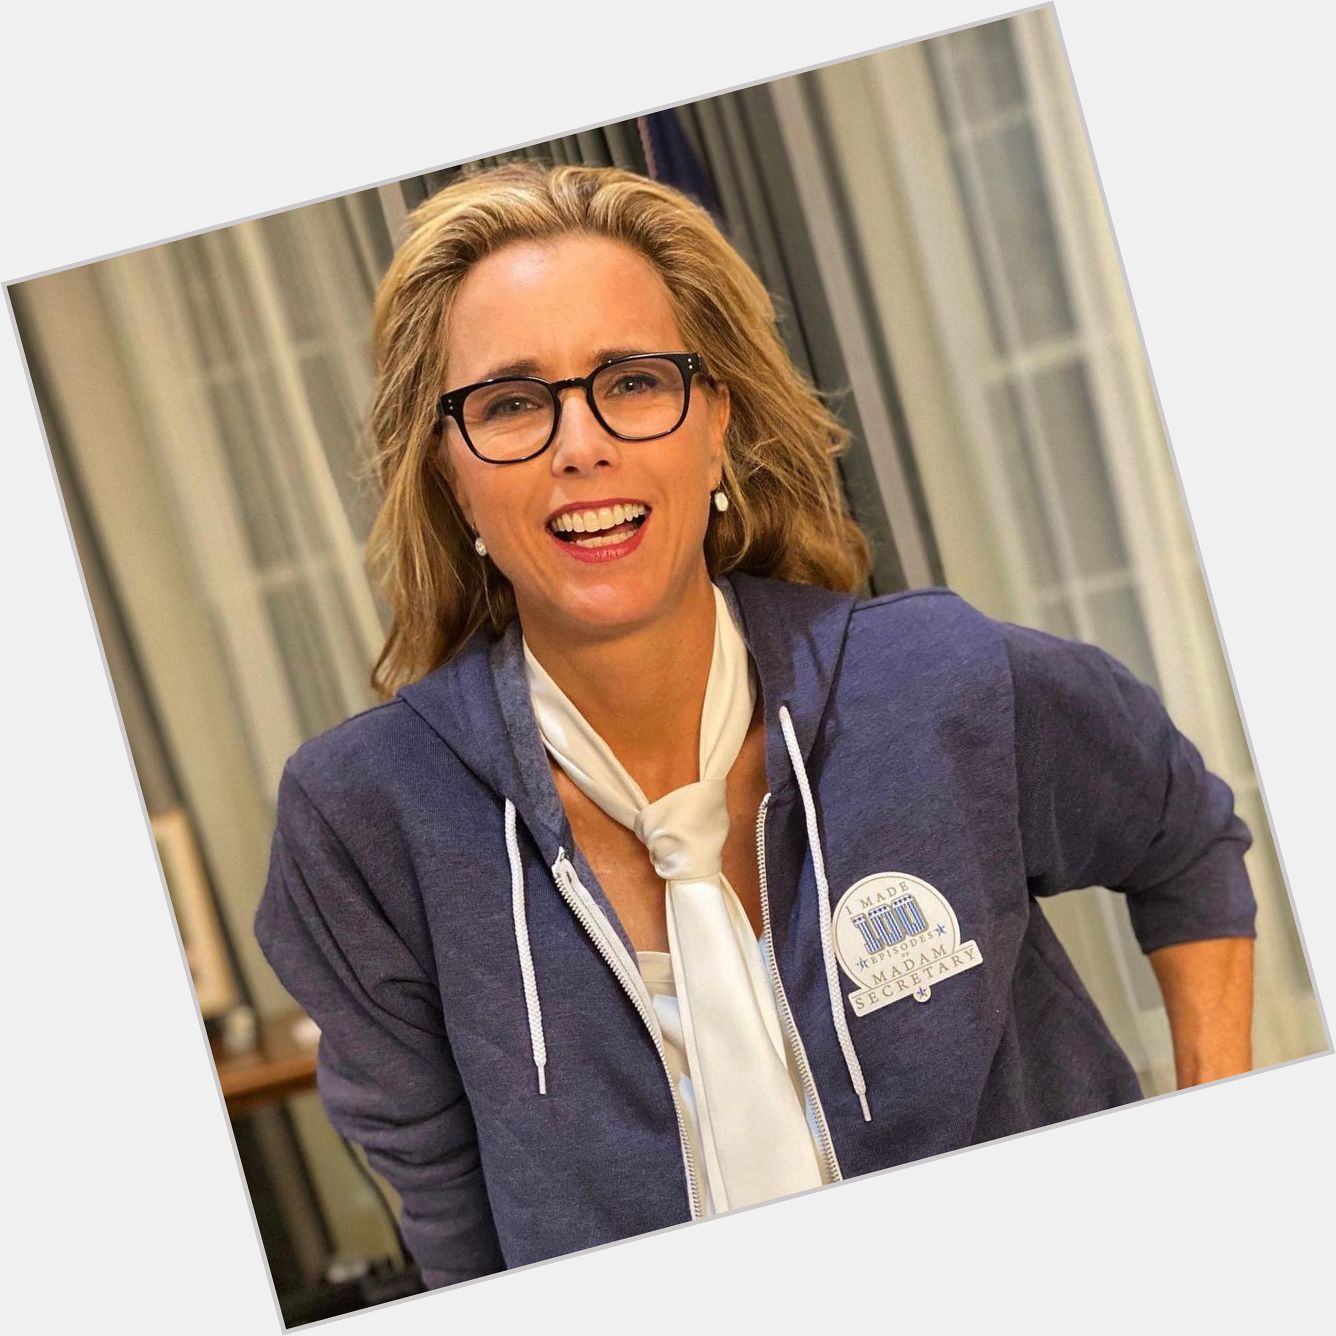 Happy birthday to the love of my life, téa leoni i love you so much 